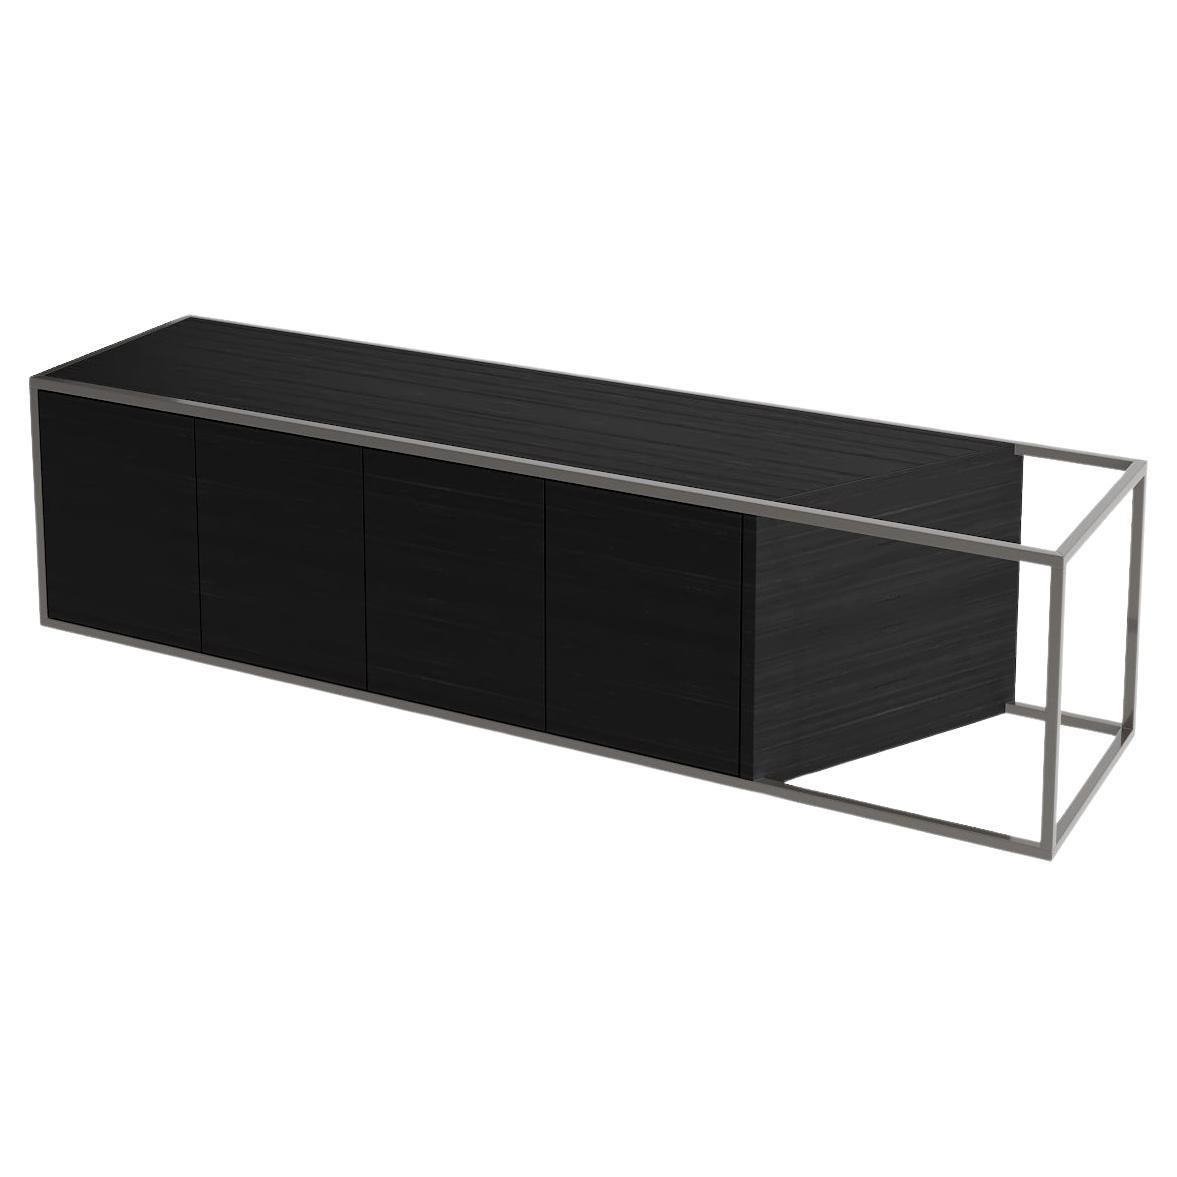 Modern Minimalist Suspended Credenza Sideboard Black Oak Wood and Black Lacquer